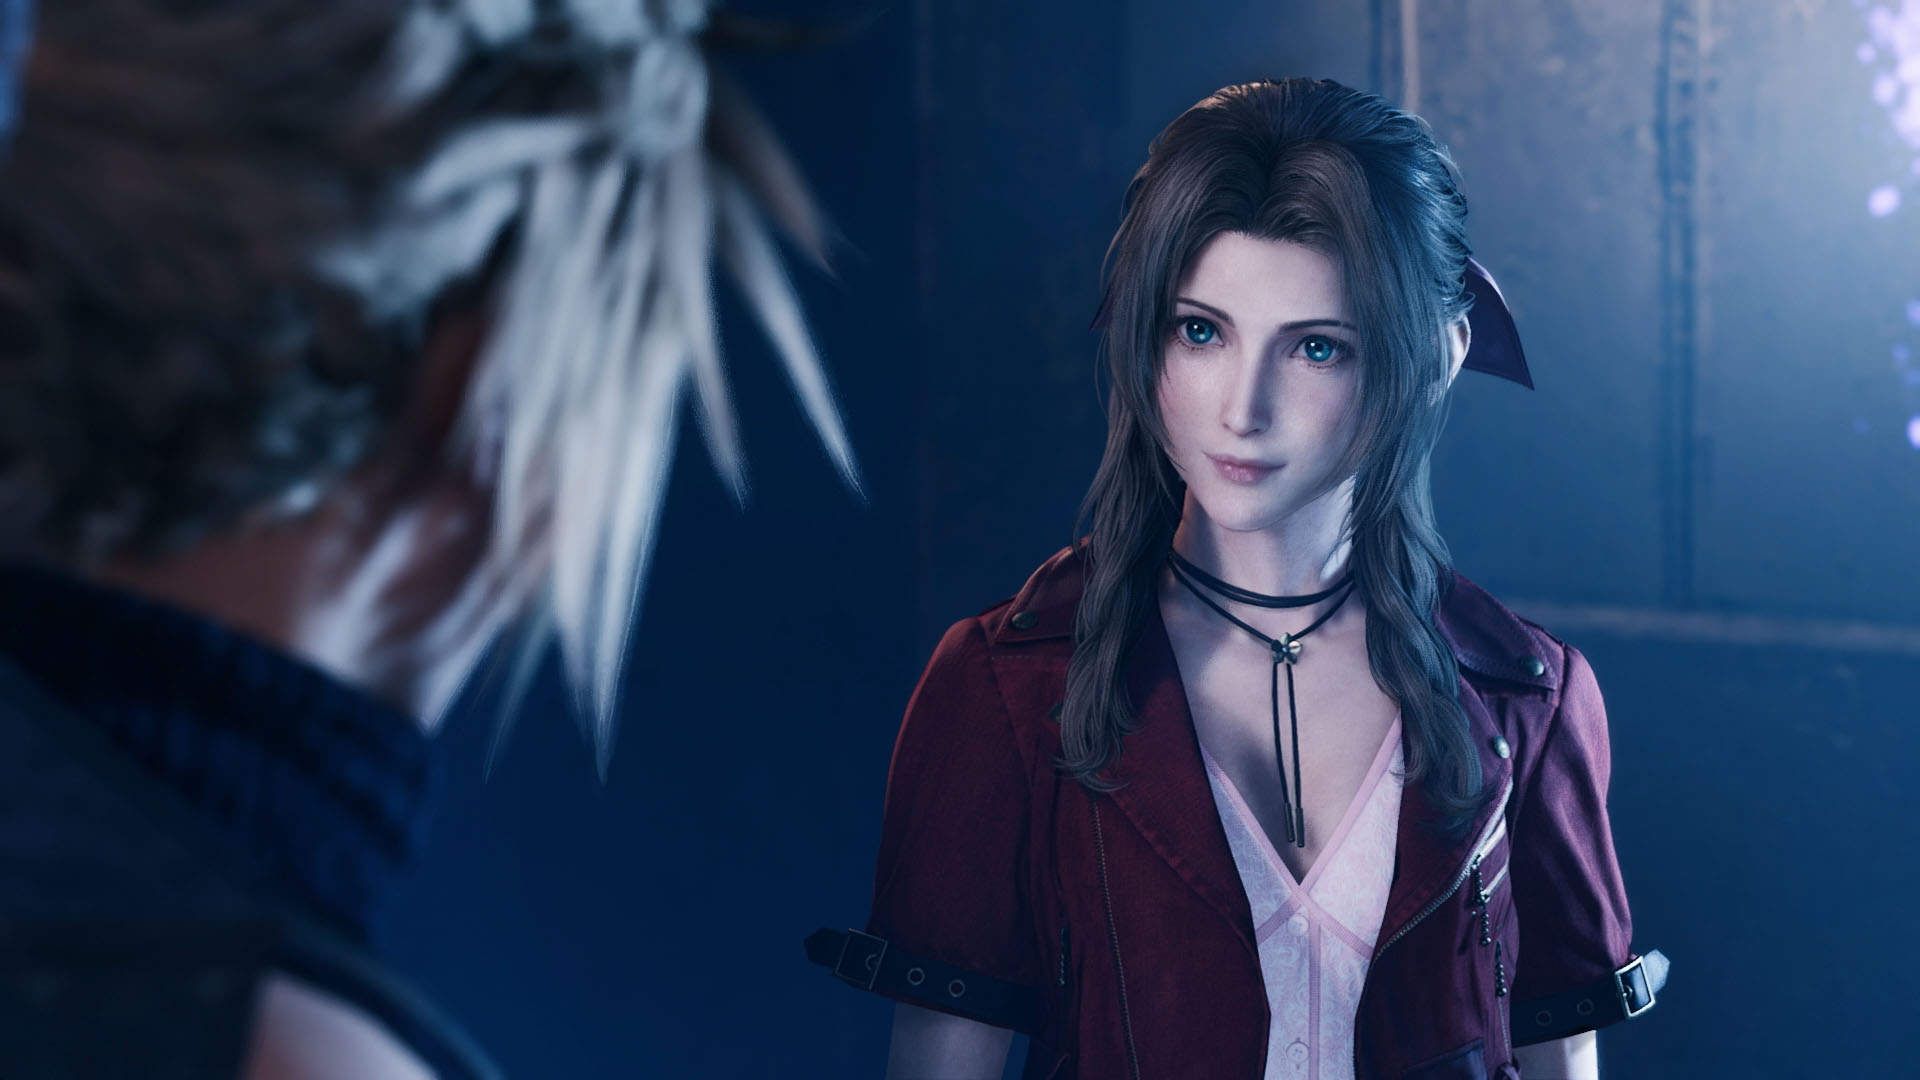 A Final Fantasy 7 Remake Fan Theory About Aerith Actually Makes a